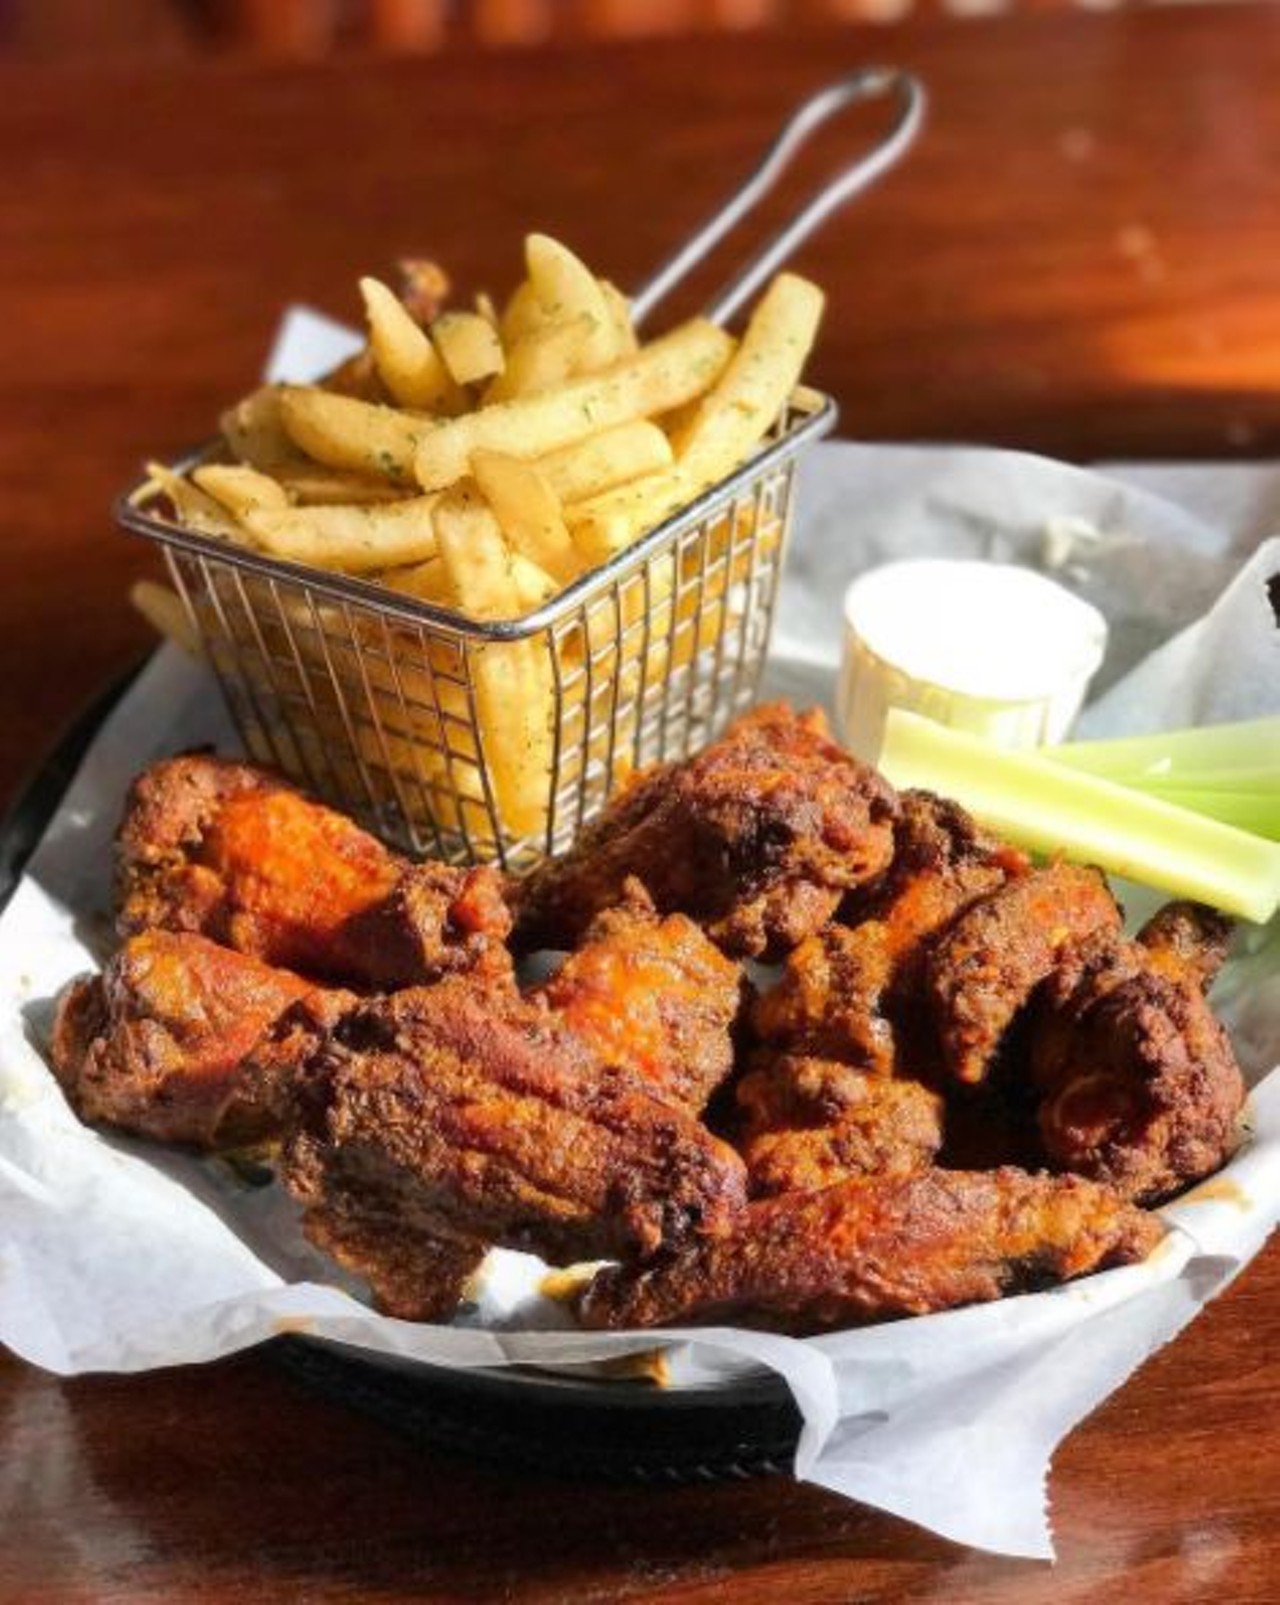 Sweetwater Tavern
400 E Congress St, Detroit, 313-962-2210
This is one restaurant you need on your bucket list, because their wings are simply amazing! Every item served is homemade with a goal to &#147;please your palate.&#148; This classic restaurant is a true Detroit favorite, that you absolutely can&#146;t pass up.
Photo via Insta user @chowdowndetroit